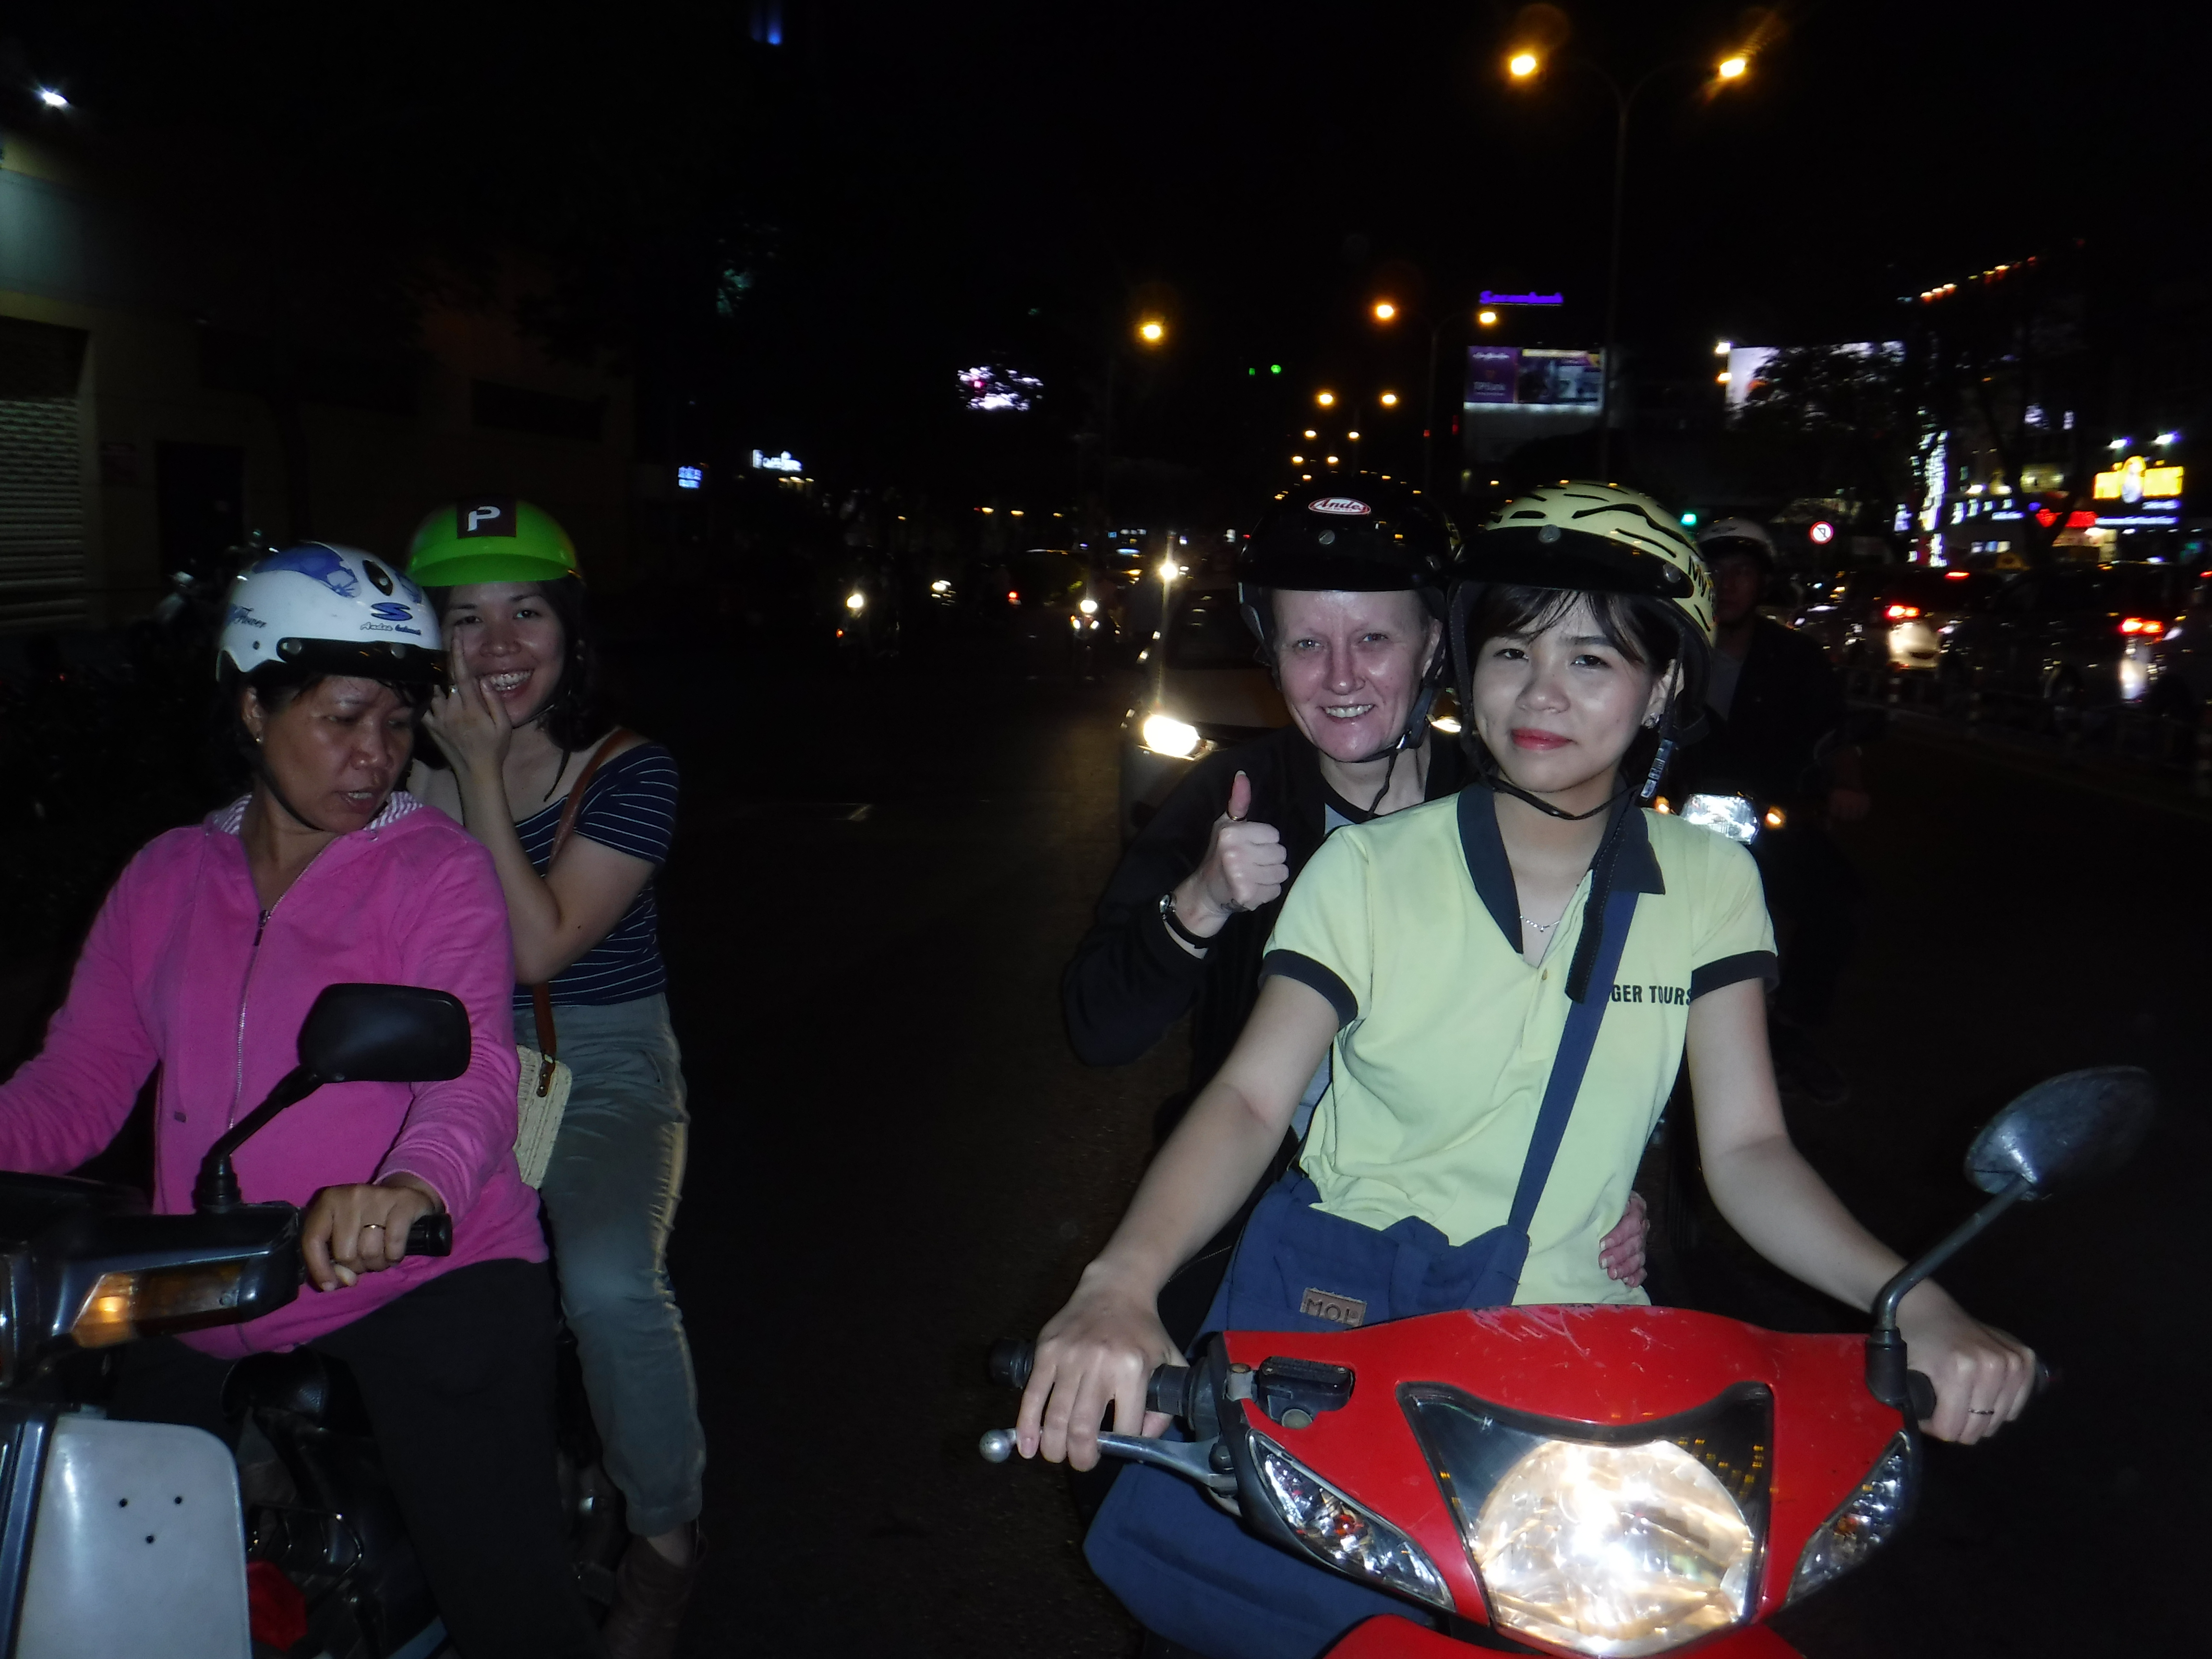 Great experience of the city of Saigon.